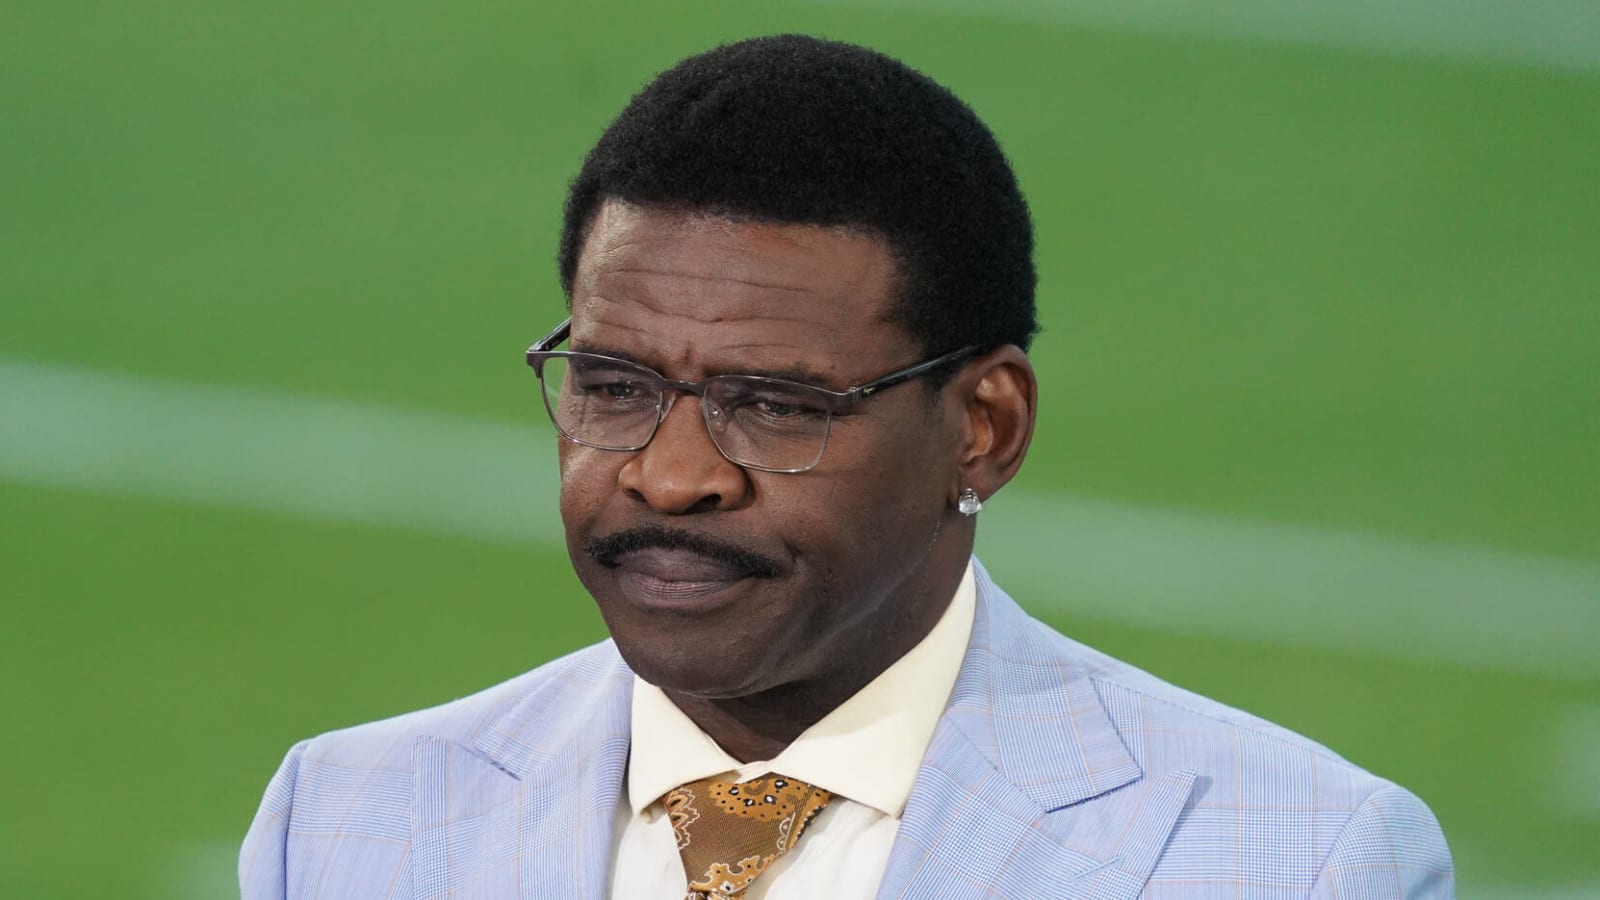 Surveillance video of Michael Irvin Marriott incident shown during press conference